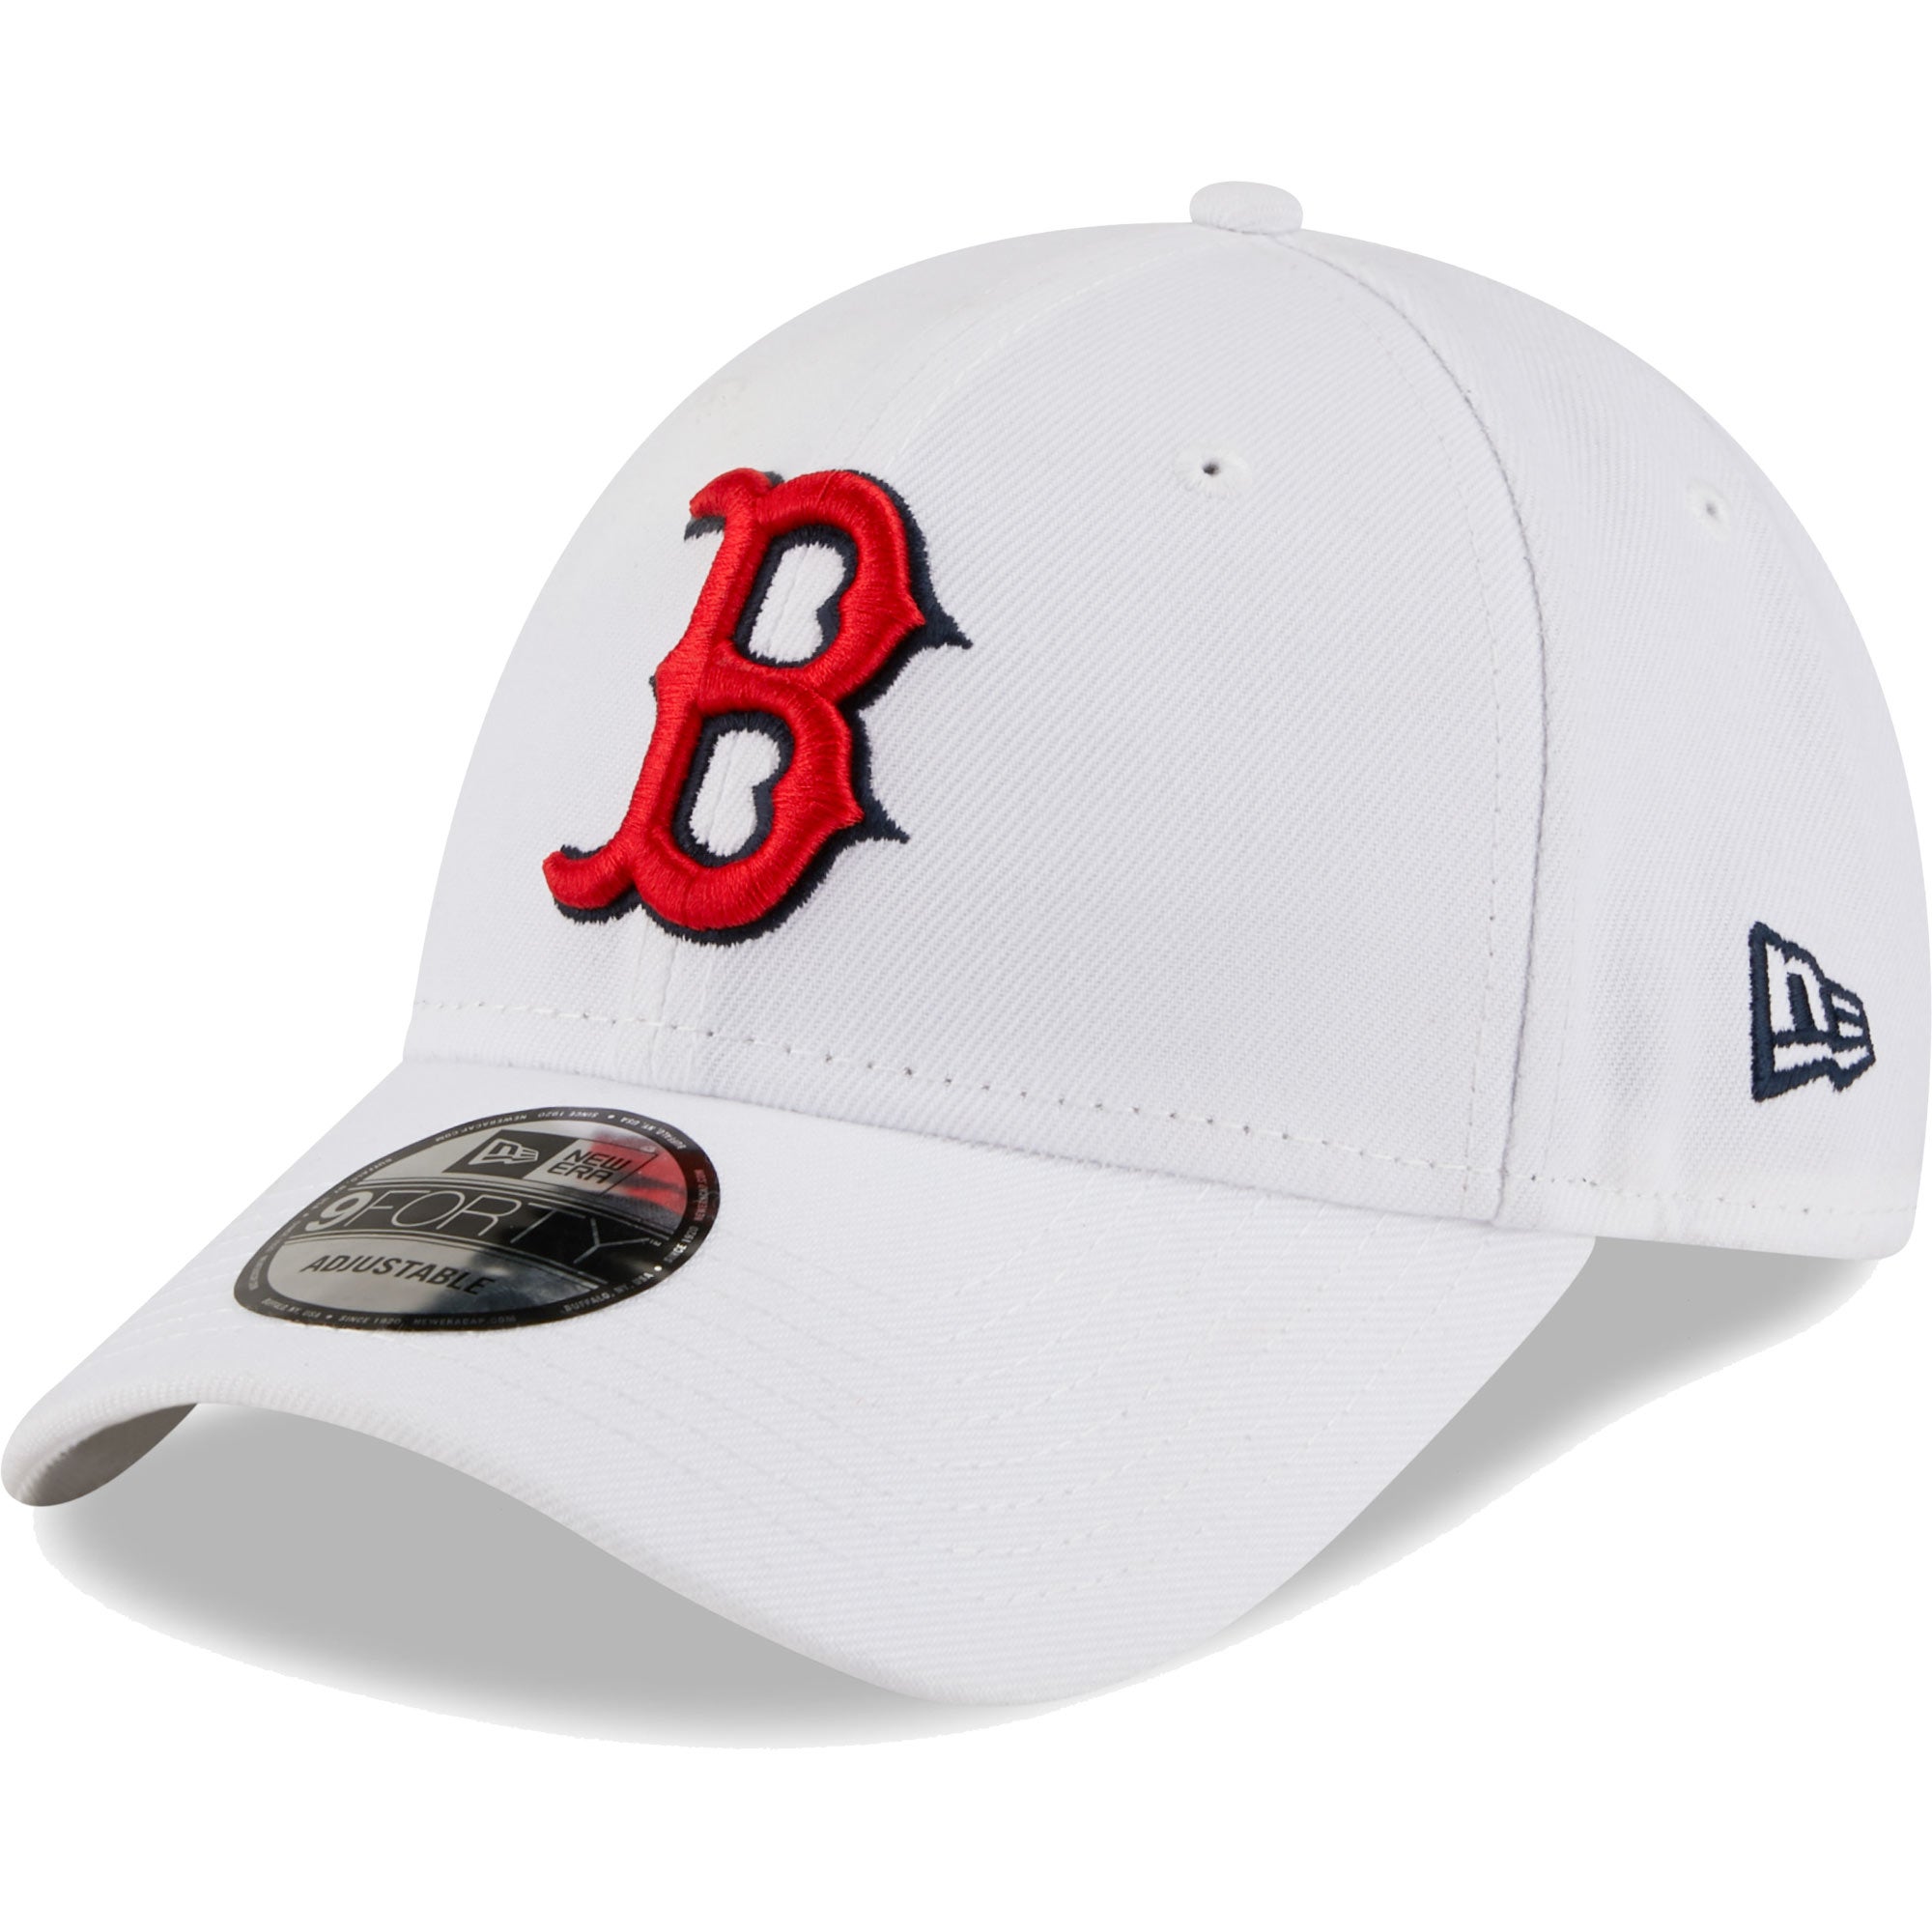 New Era Red Sox League II 9FORTY Adjustable Hat